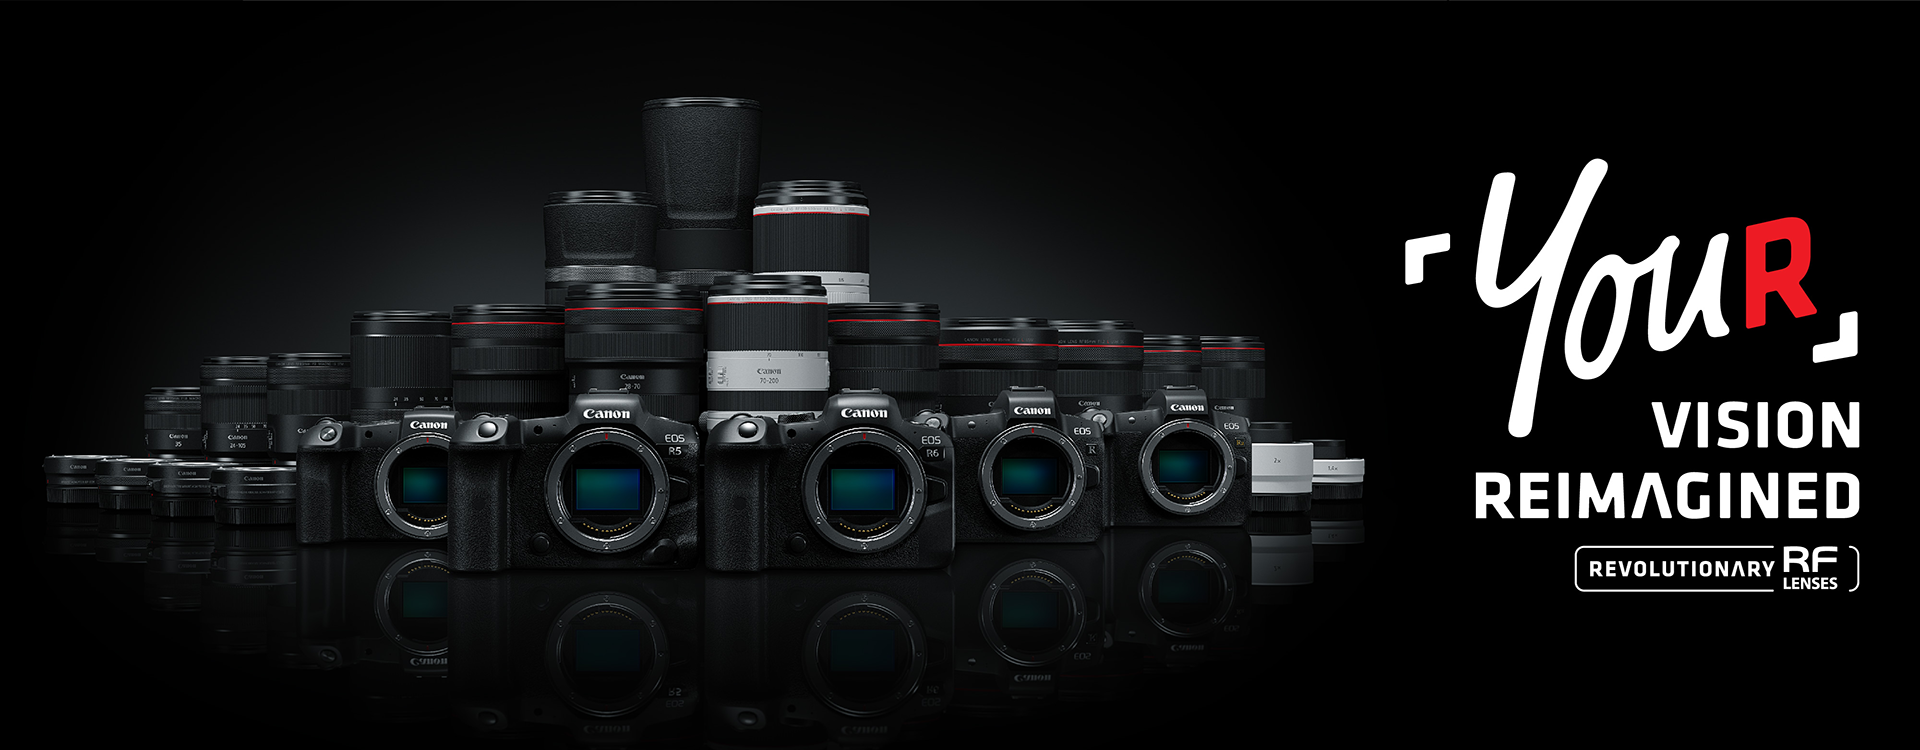 2020-08-2484 ID.CANON - Update Banner EOS R5 R6-01